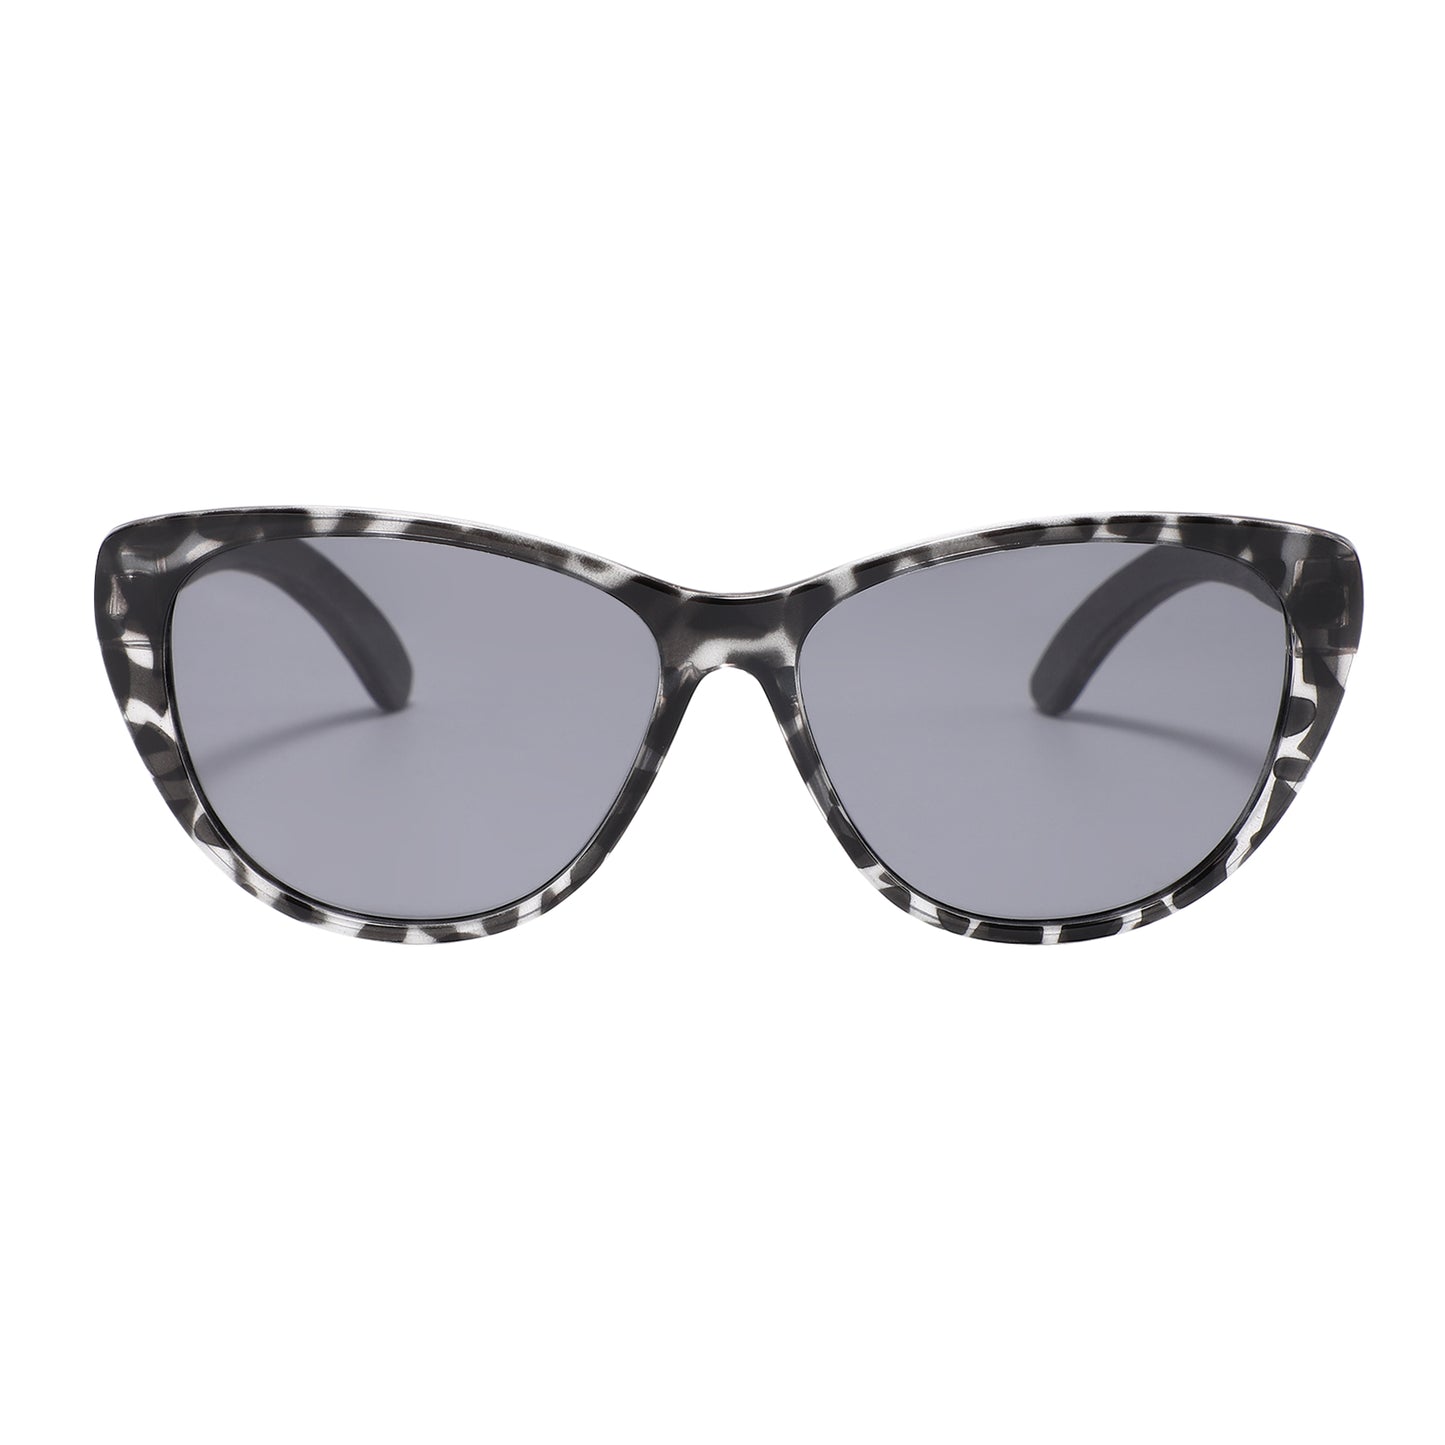 The new, oh-so-flattering Callies in oh-so-trendy black tortoise-shell frame with polarized grey lens and ebony wooden arms.